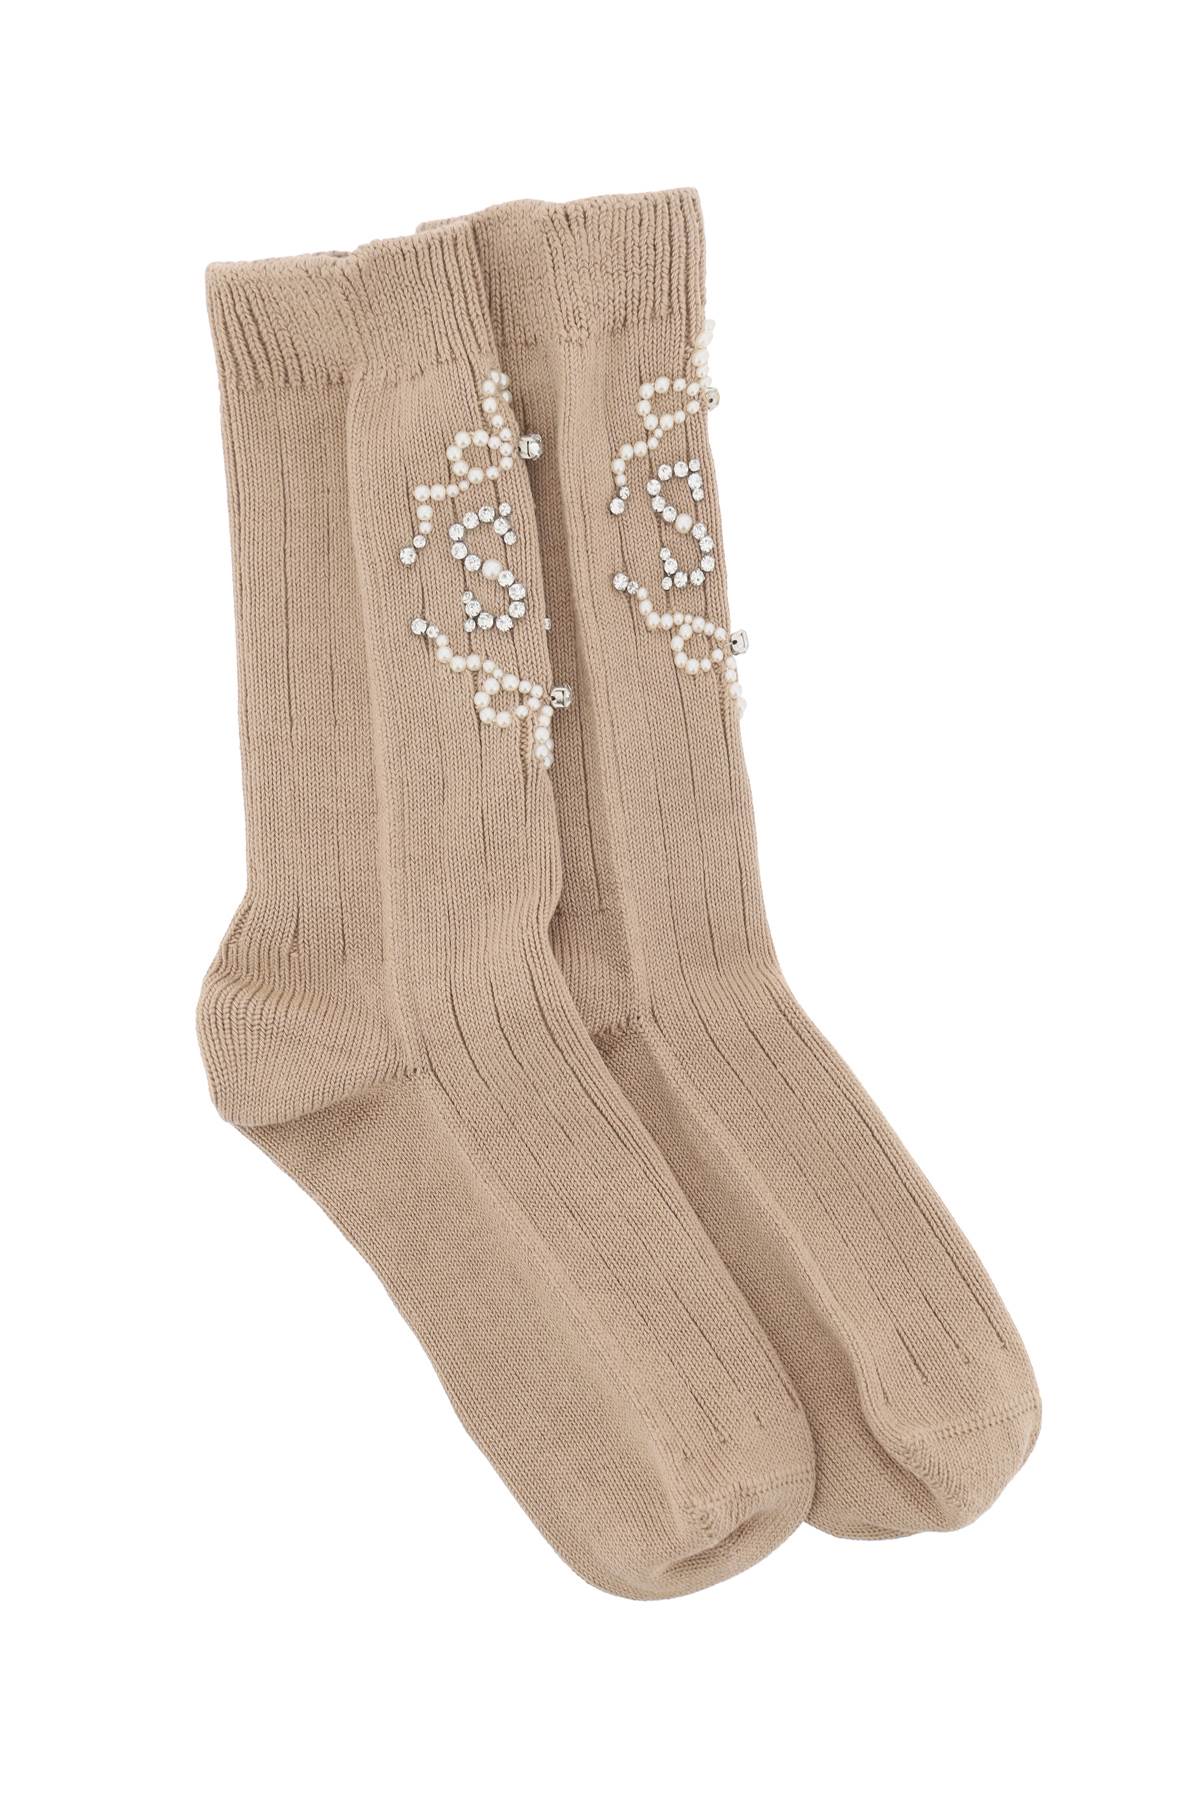 Simone rocha sr socks with pearls and crystals-0